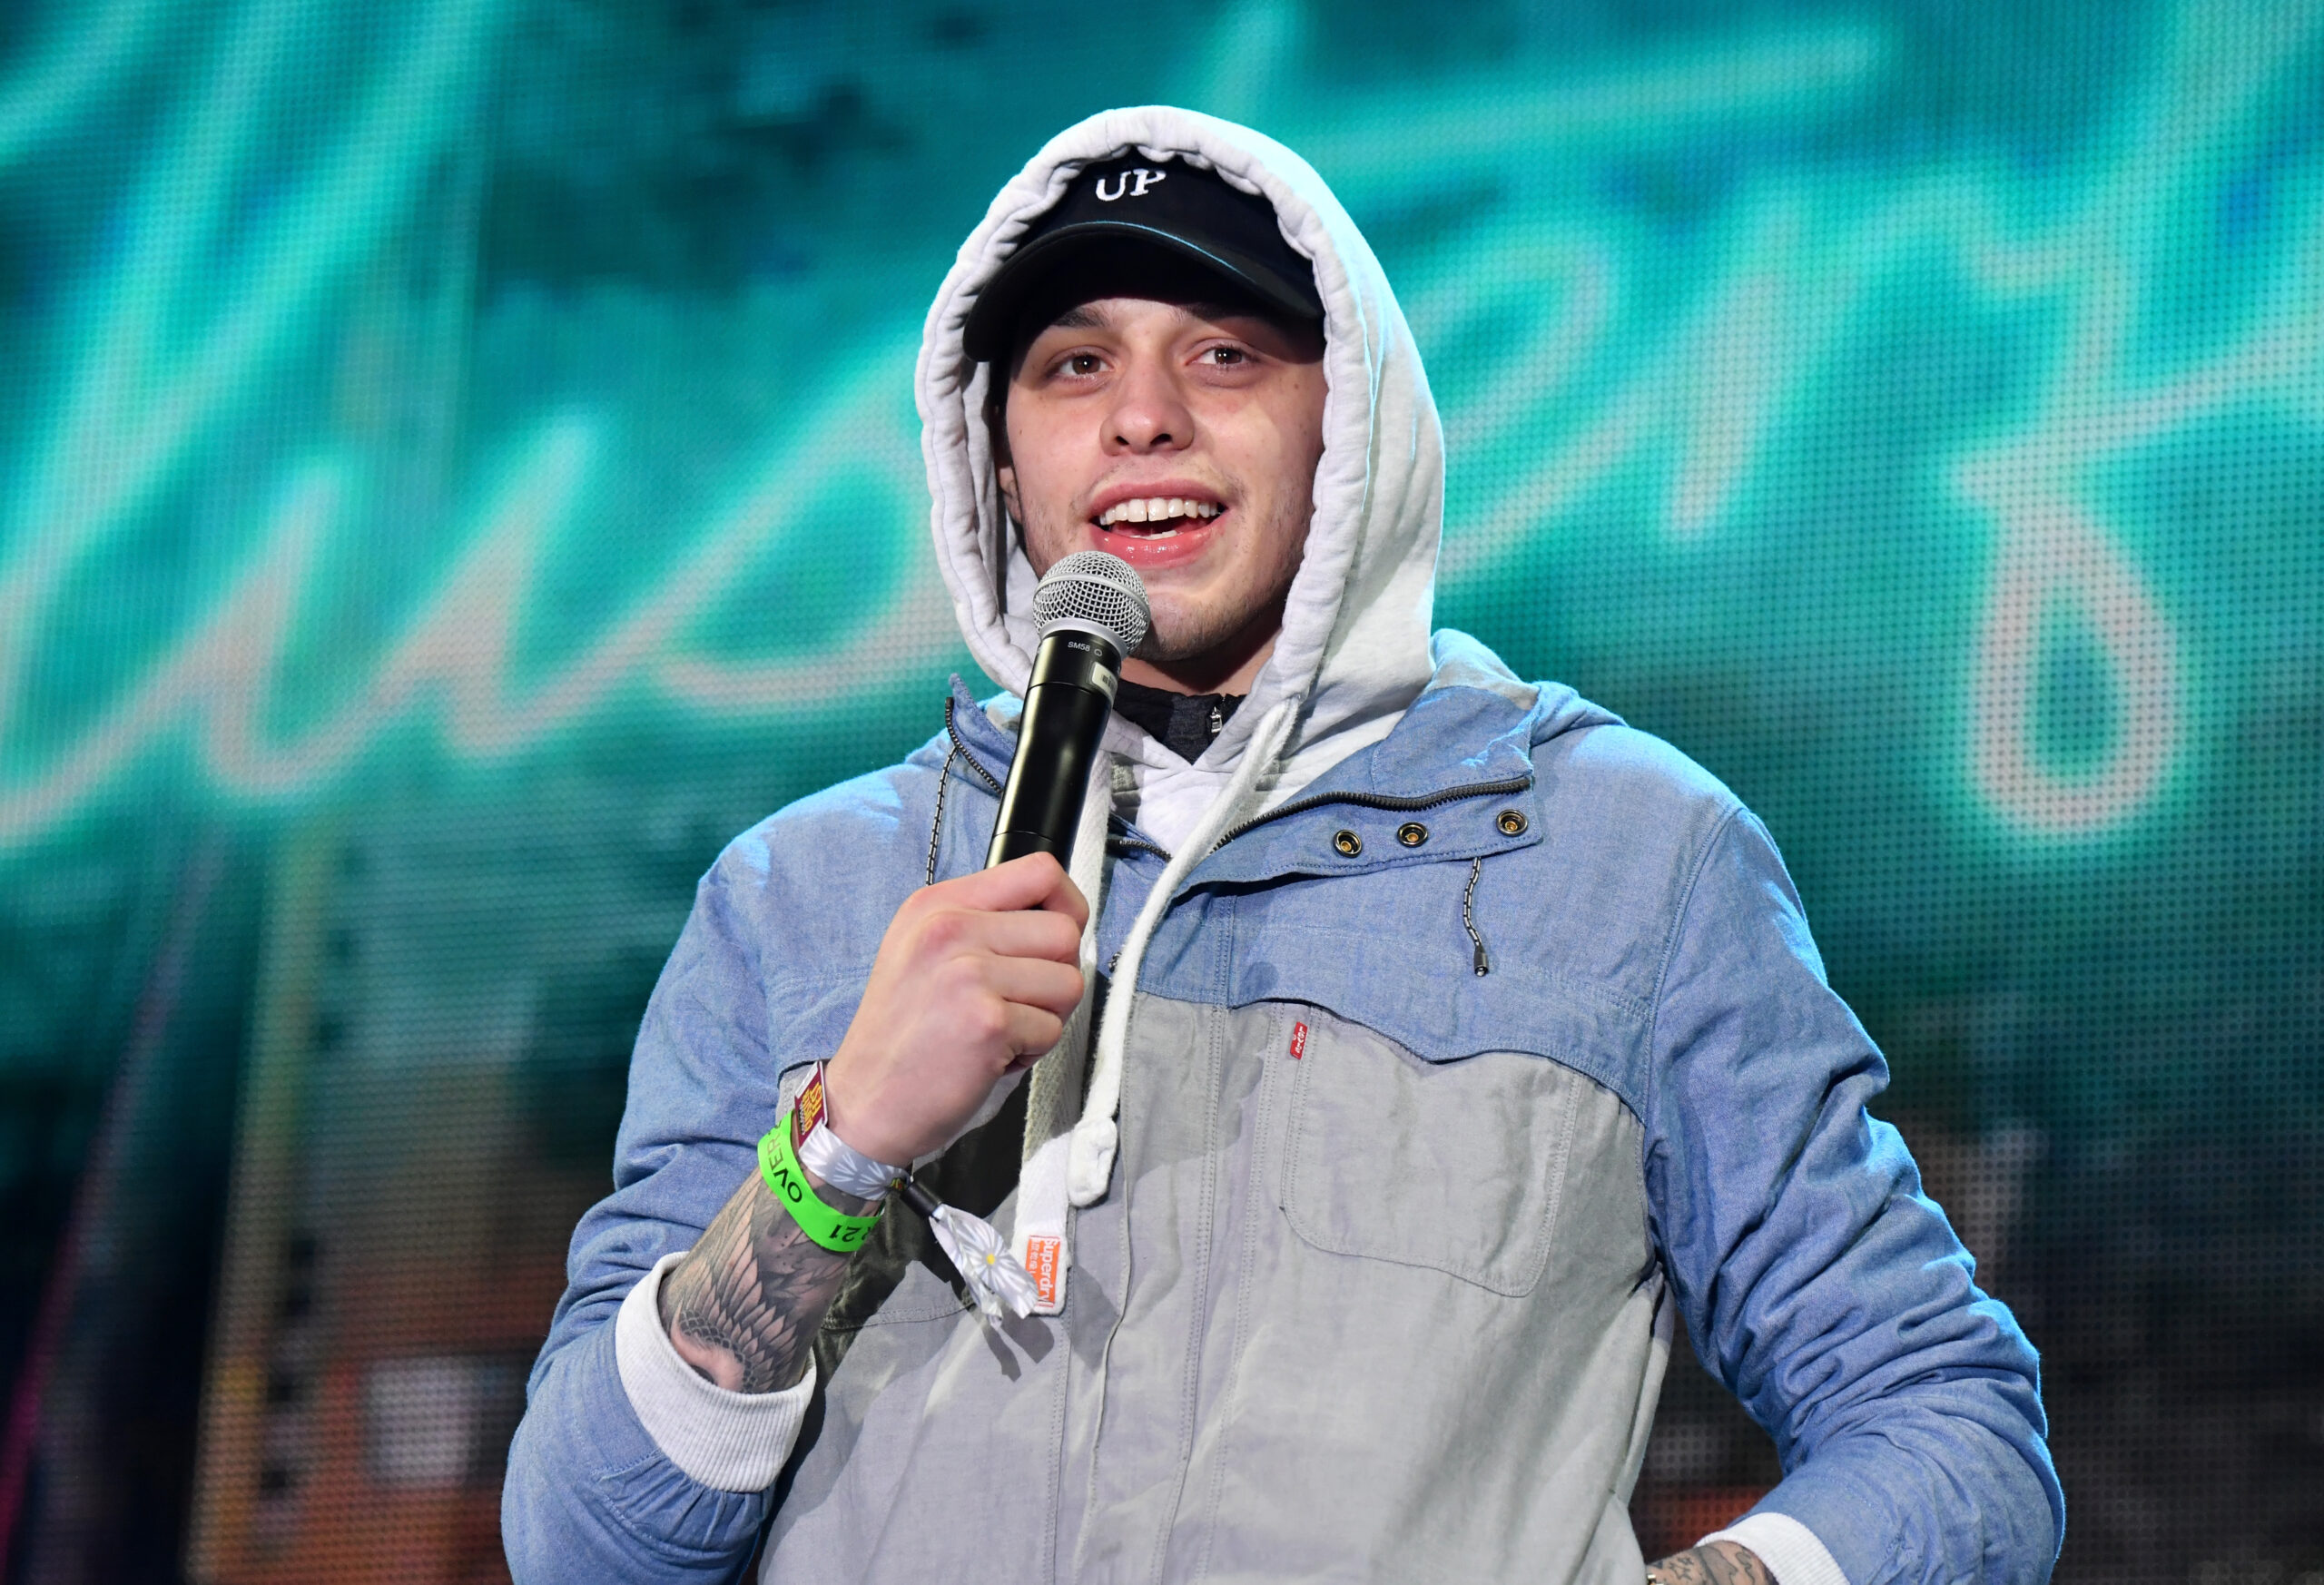 Pete Davidson Fires Back At Fan Who Accused Him Of Being Racist